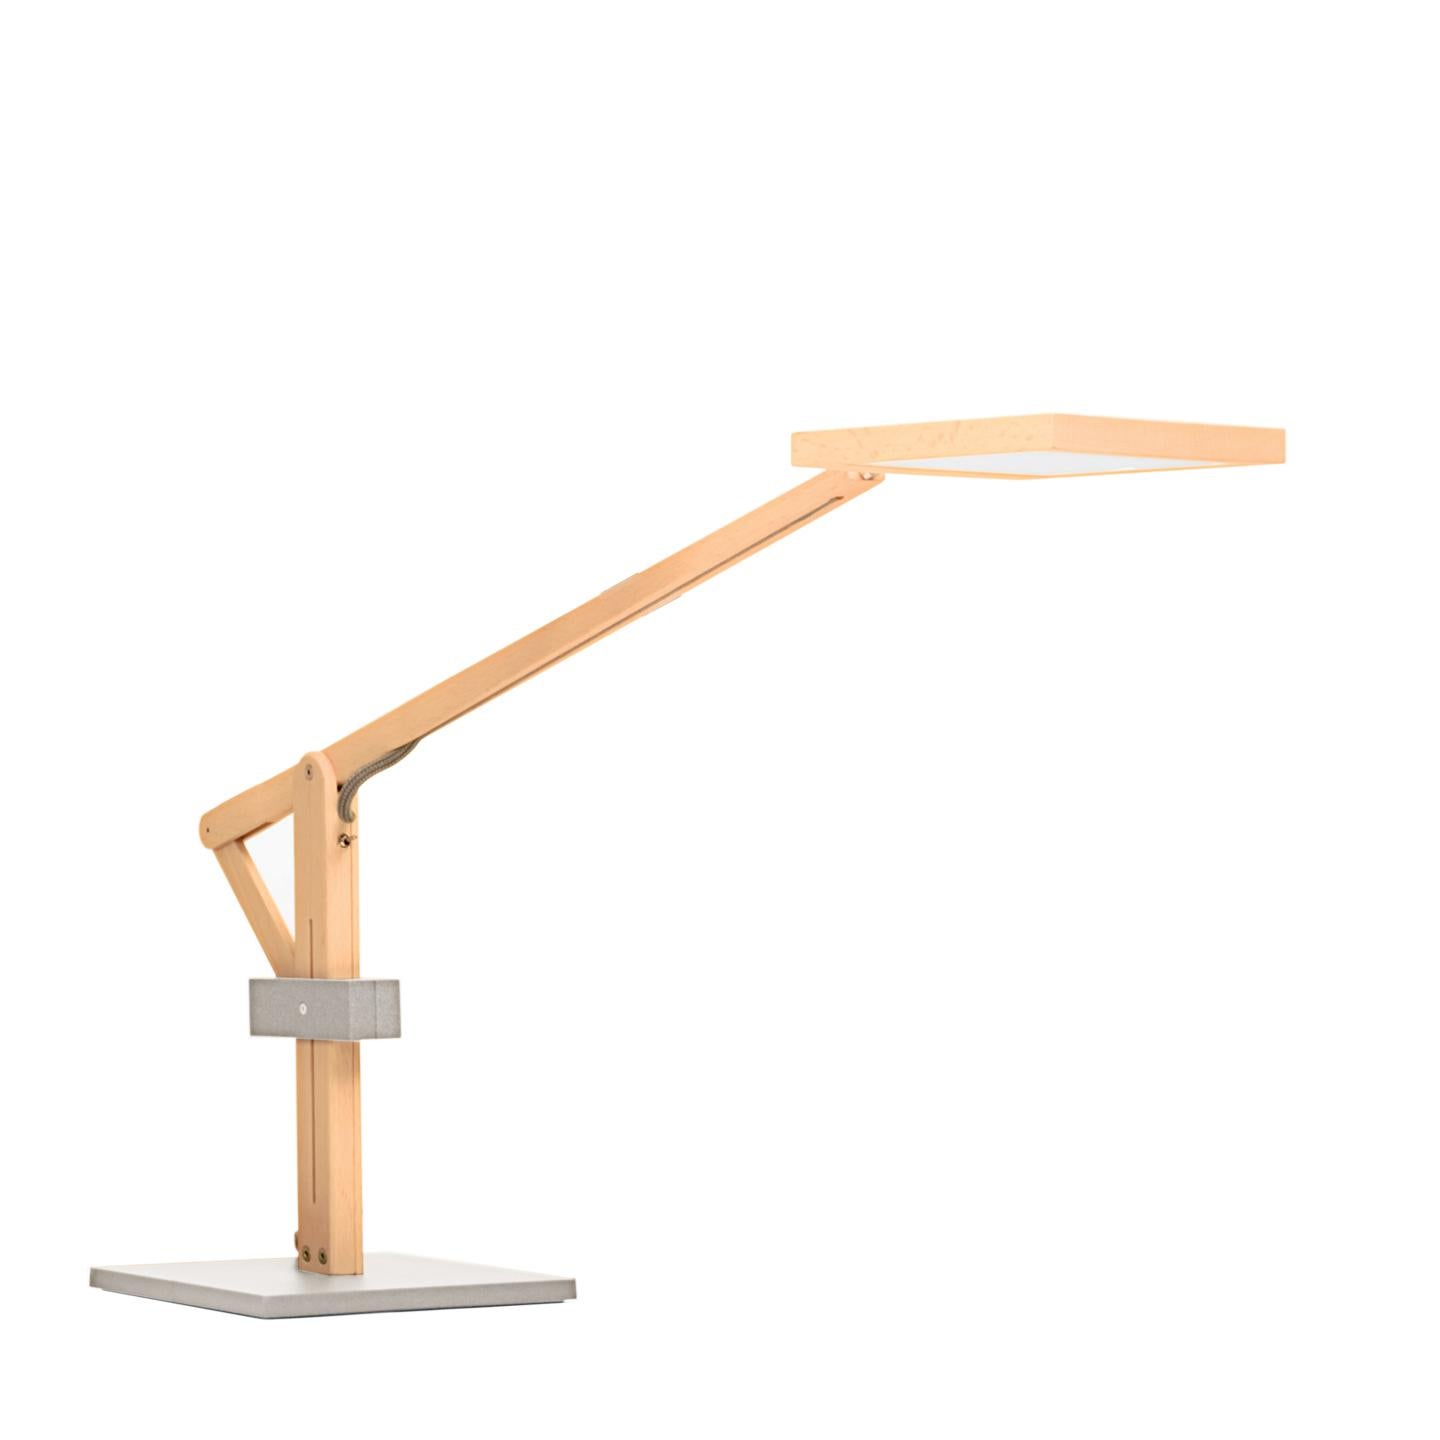 Leva Evo (2017) is the evolution of task lighting to create the perfect light for your office, desk or bedside. Massimo Iosa Ghini melds technological innovations, like LED touch dimming, and stunning handcrafted materials, palisander or blanched